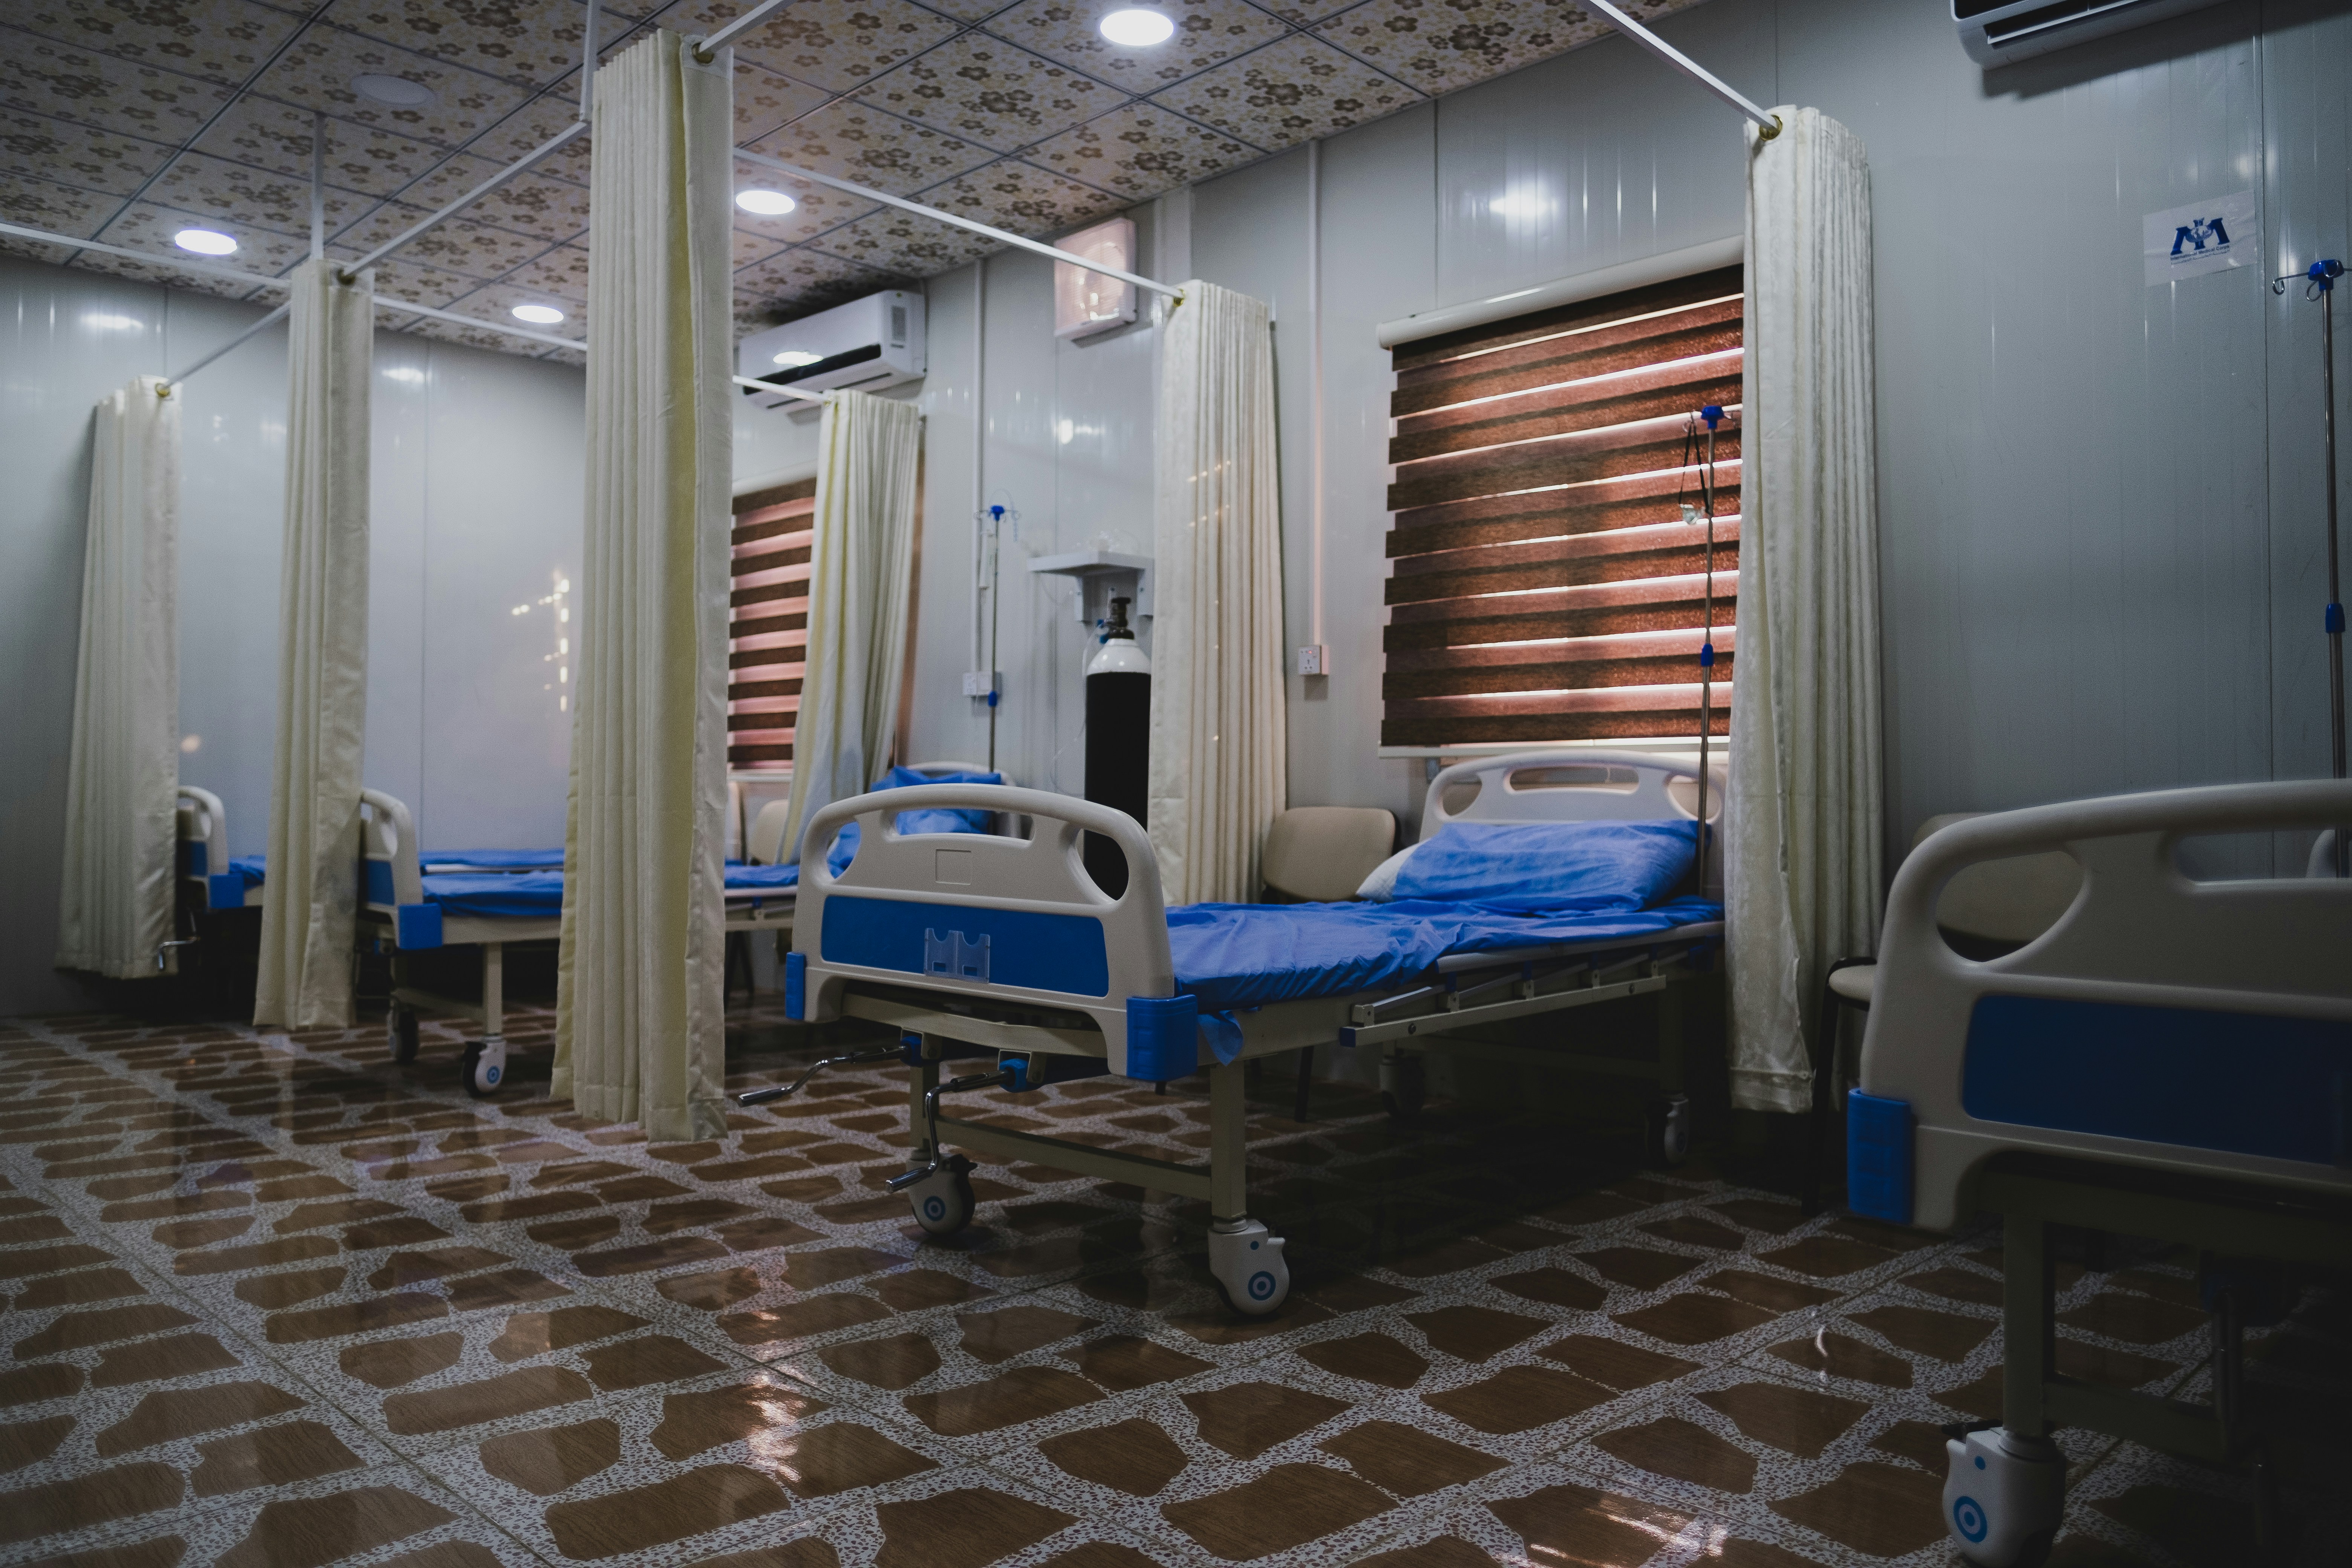 Beds at a hospital in Sinjar.